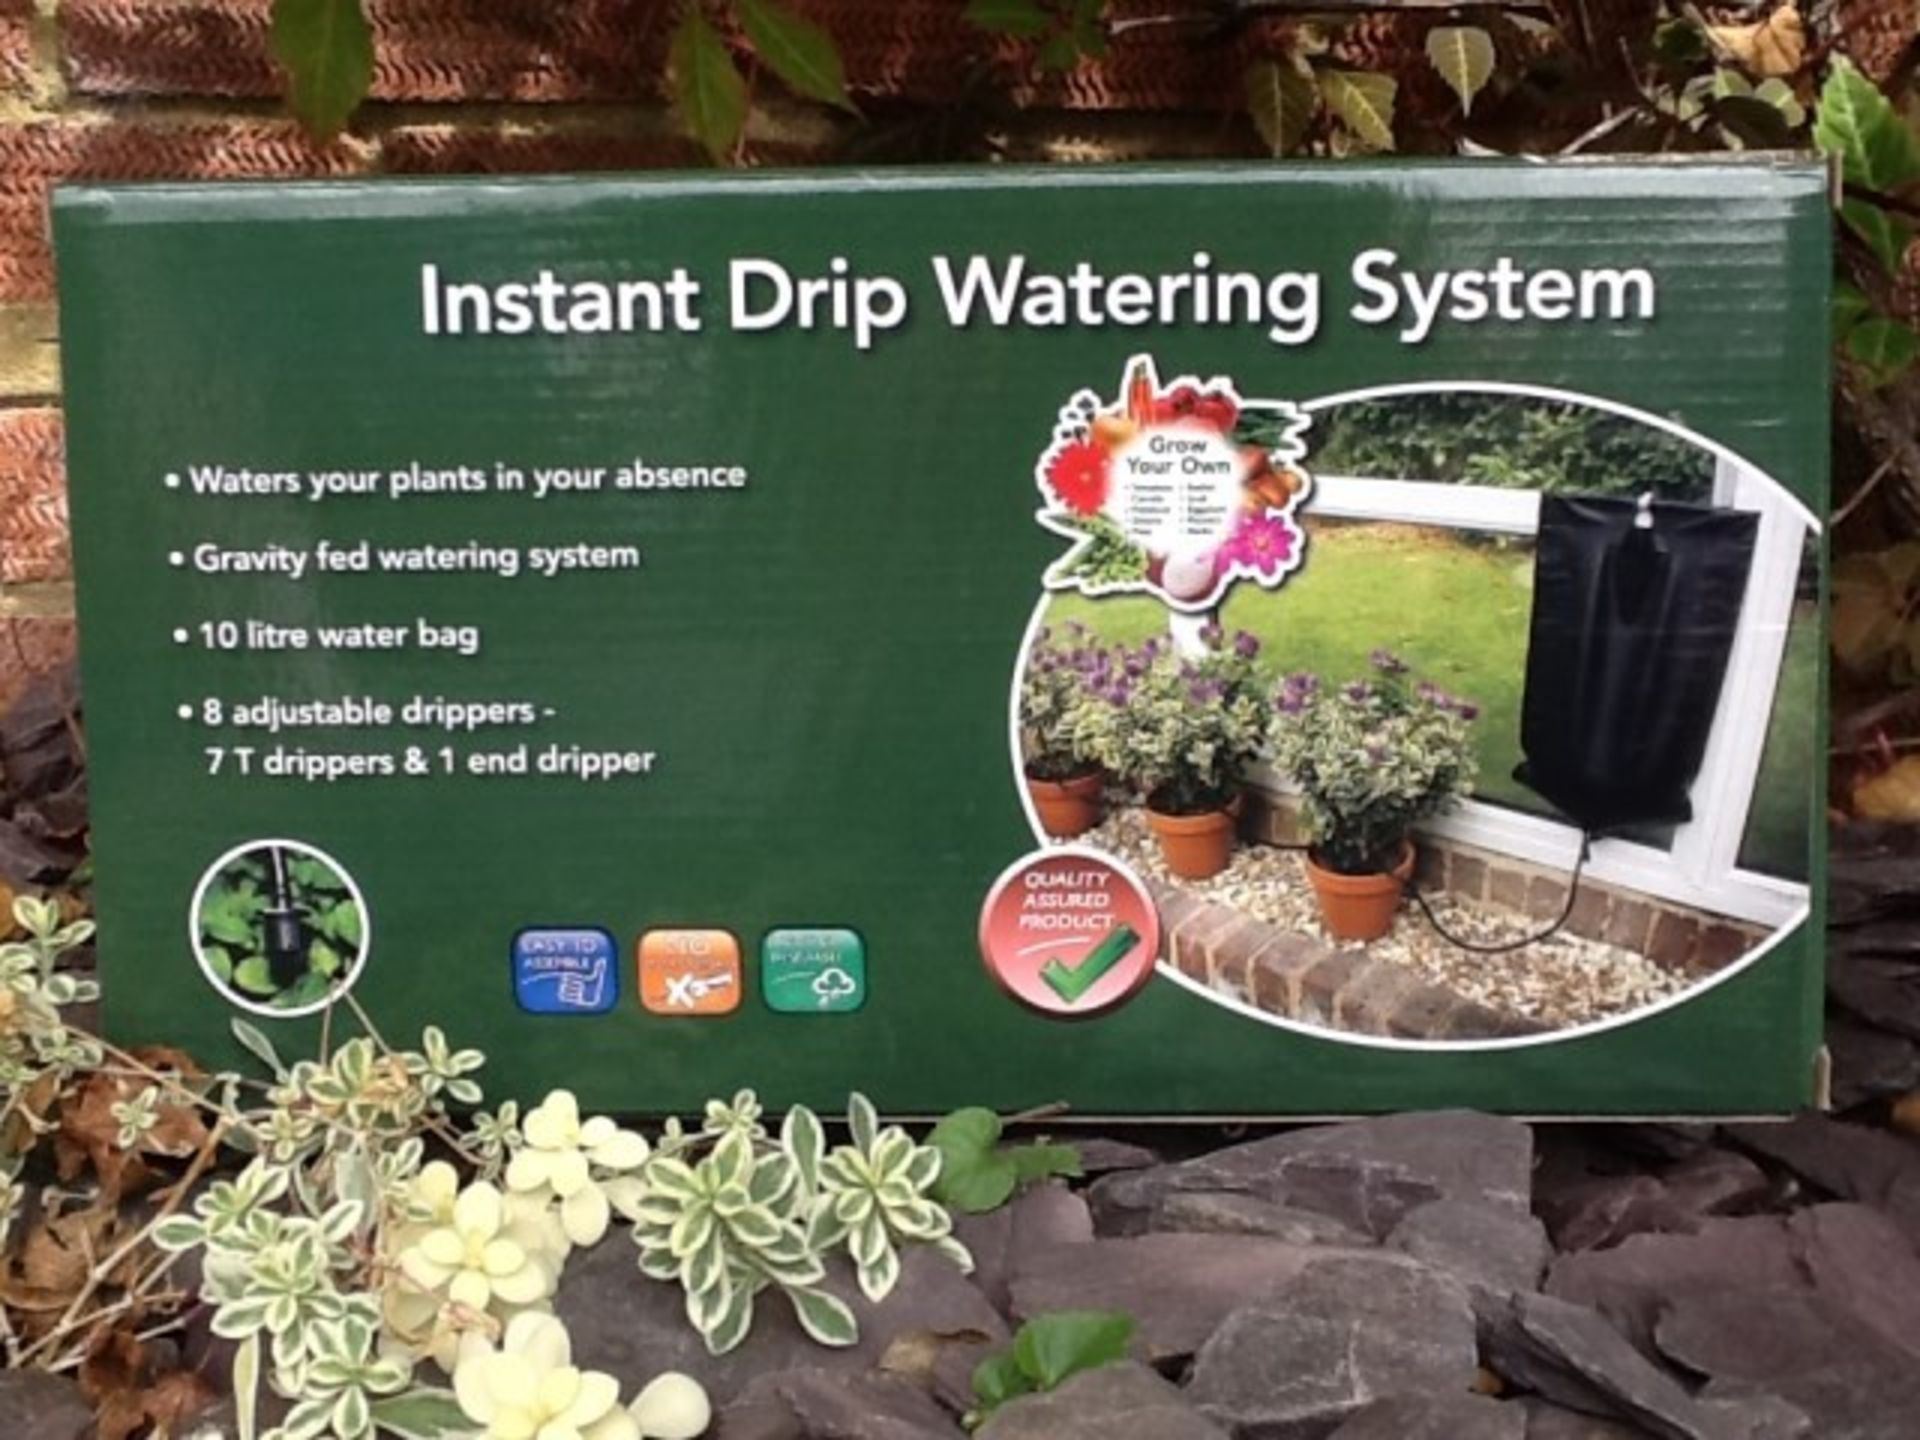 V Grade A Instant Drip Watering System With Eight Adjustable Drippers - Image 2 of 2